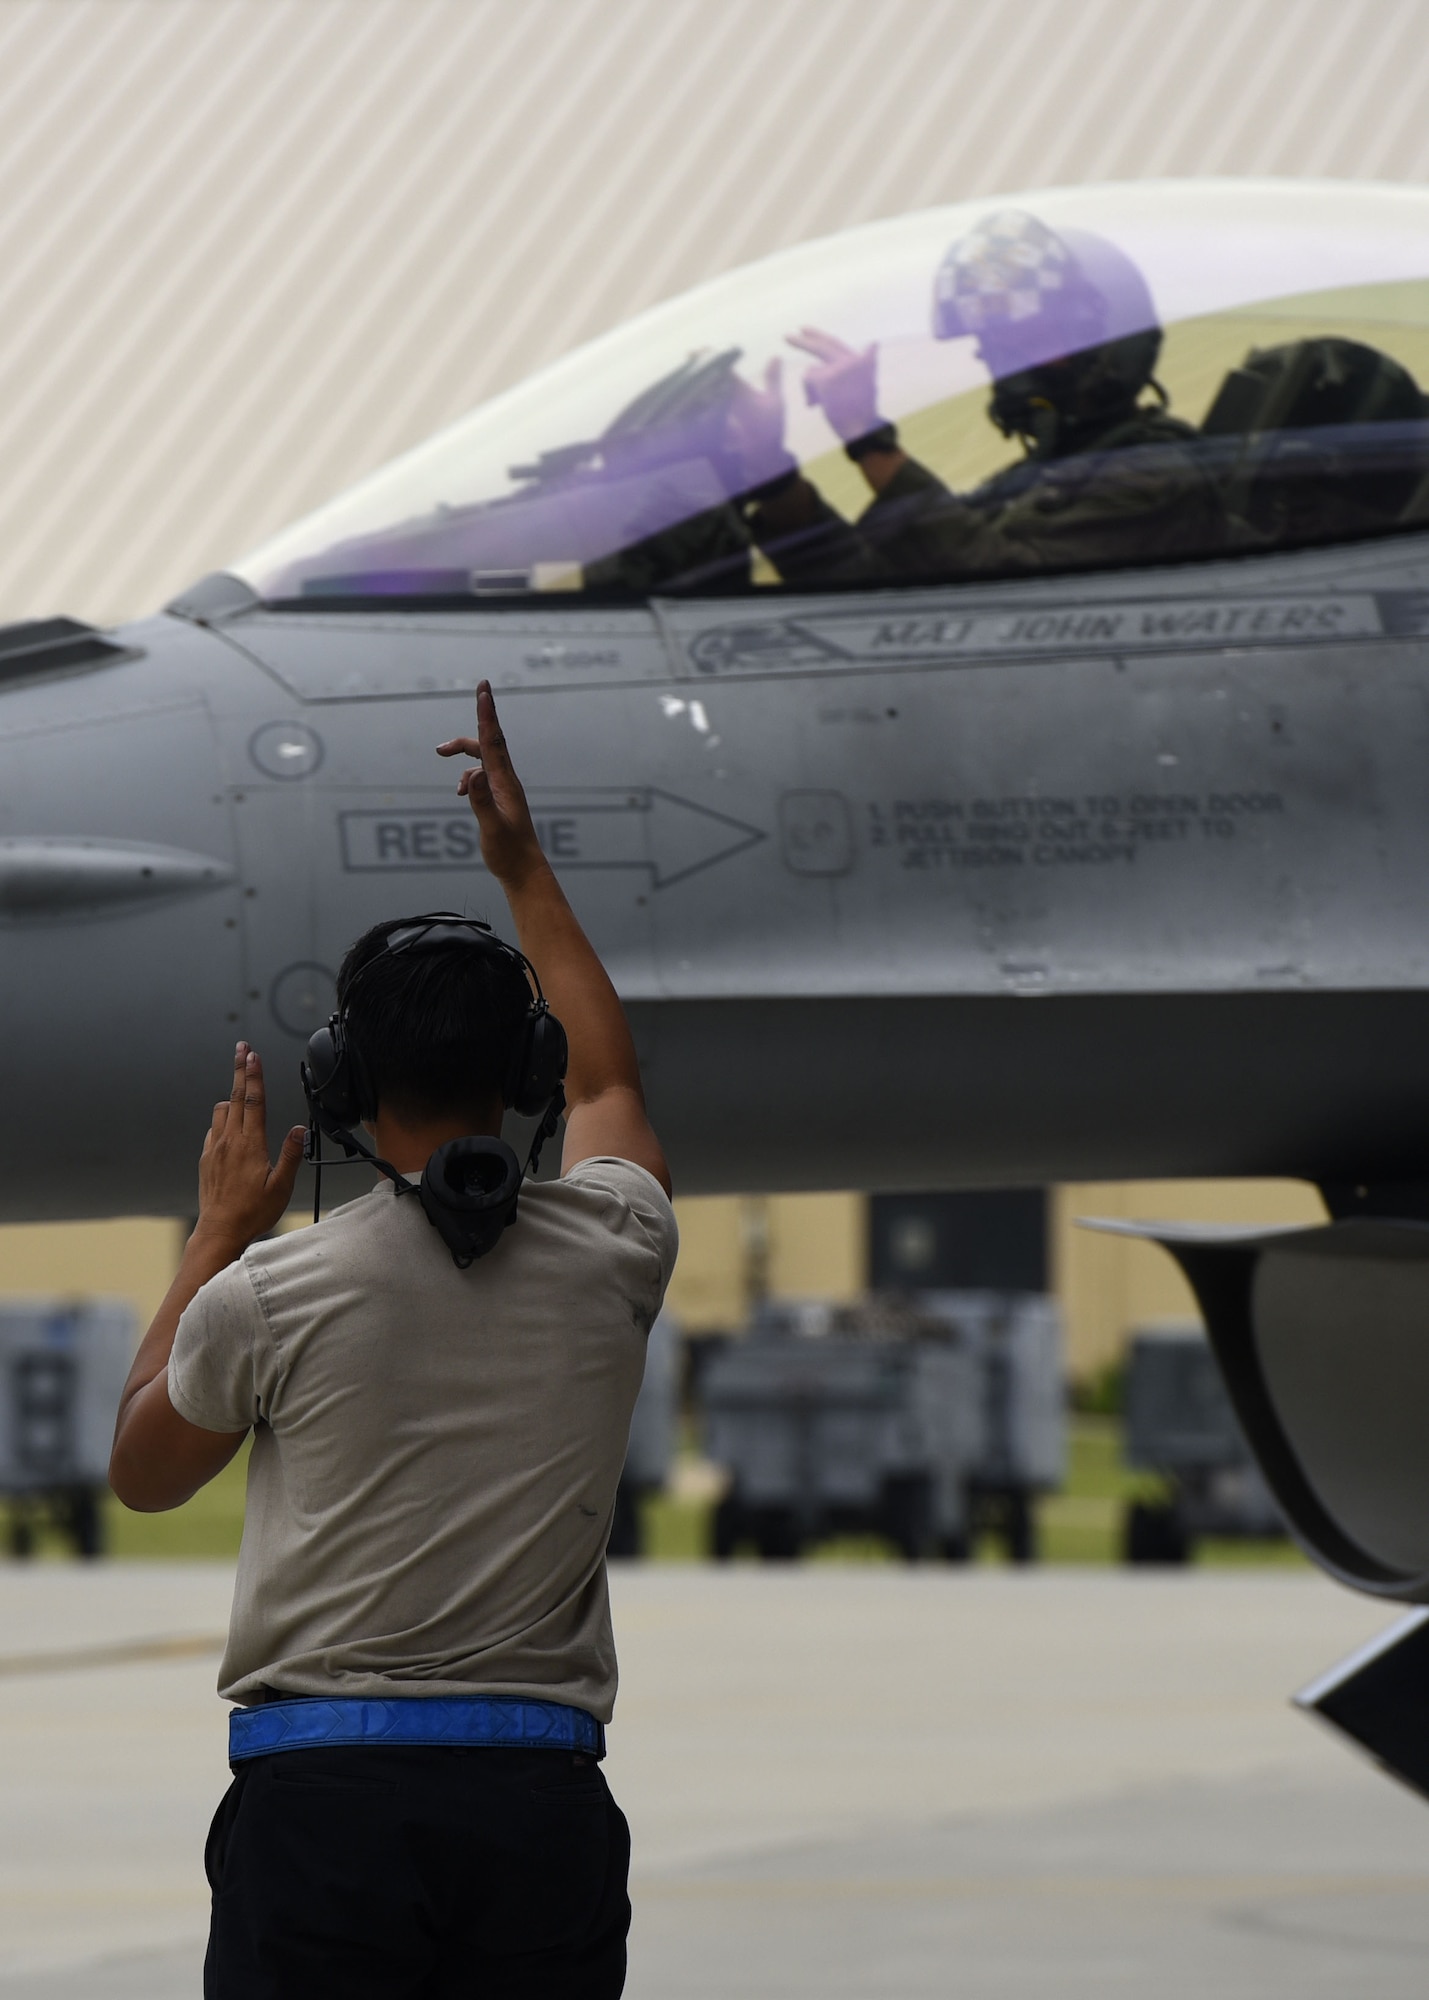 A U.S. Air Force maintainer assigned to the 20th Maintenance Group, left, signals “Roll’em,” a 55th Fighter Squadron (FS) saying, to an F-16CM Fighting Falcon pilot assigned to the 55th FS at Shaw Air Force Base, S.C., June 27, 2018.